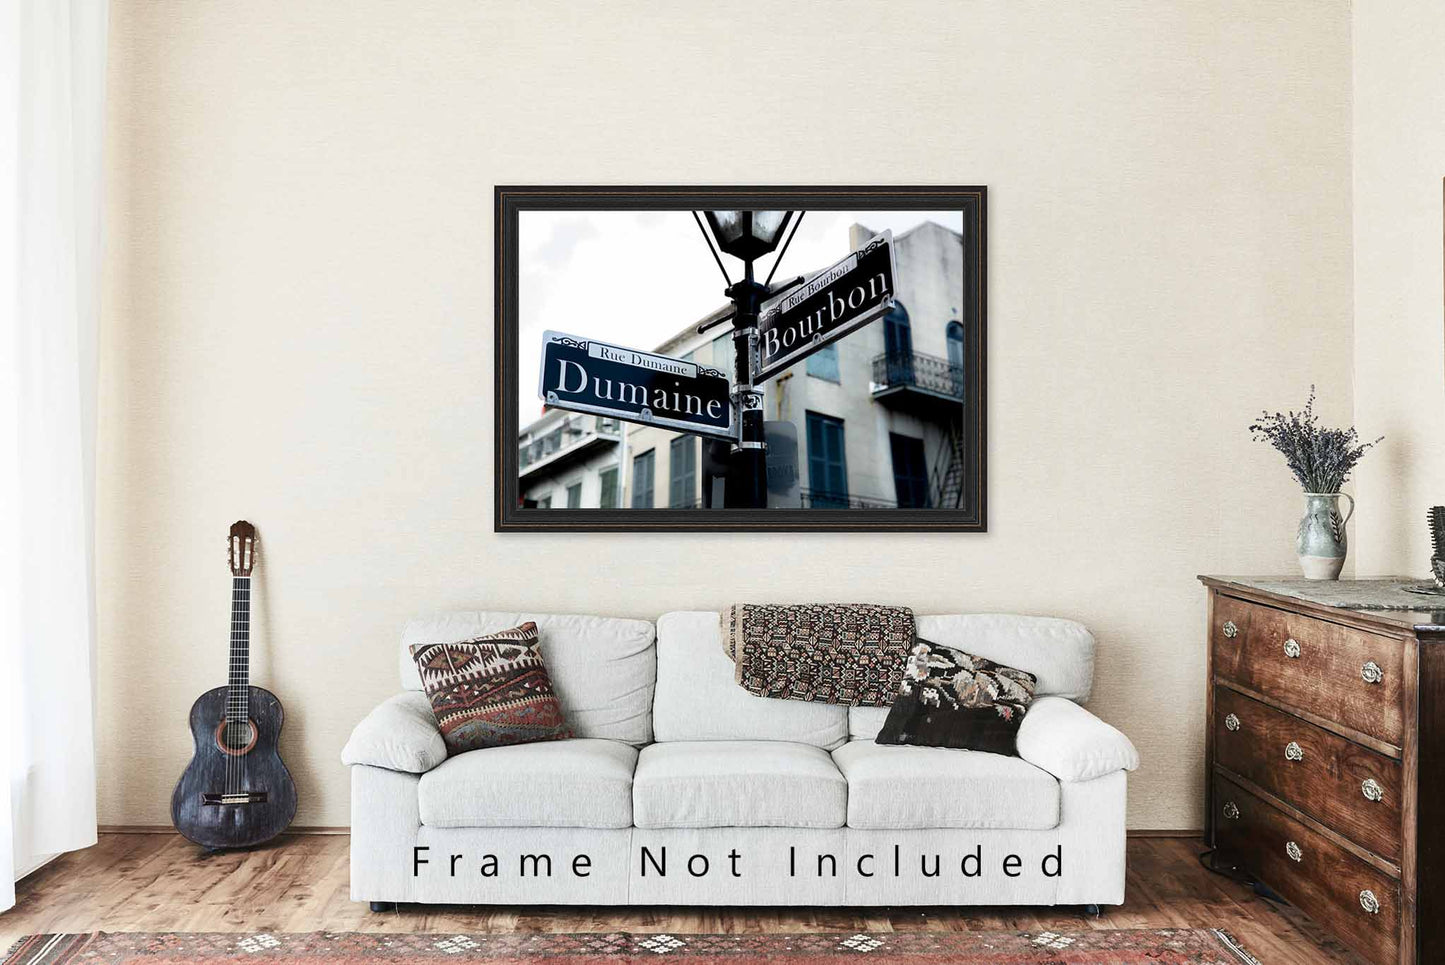 NOLA Photo Print | Dumaine and Bourbon Street Sign Picture I Louisiana Wall Art | New Orleans Photography | French Quarter Decor